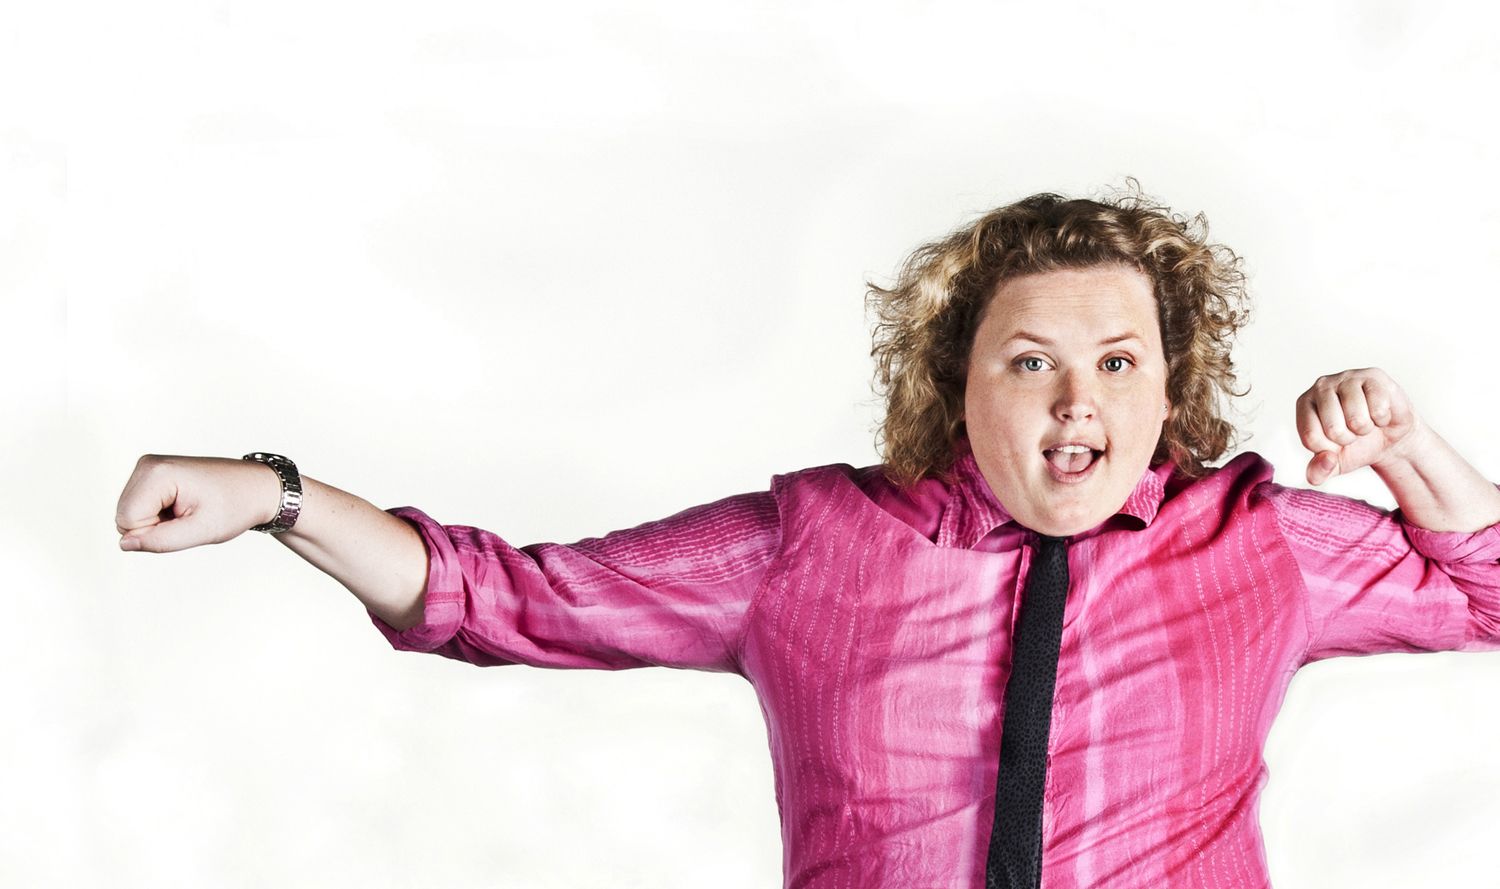 Pictures of Fortune Feimster